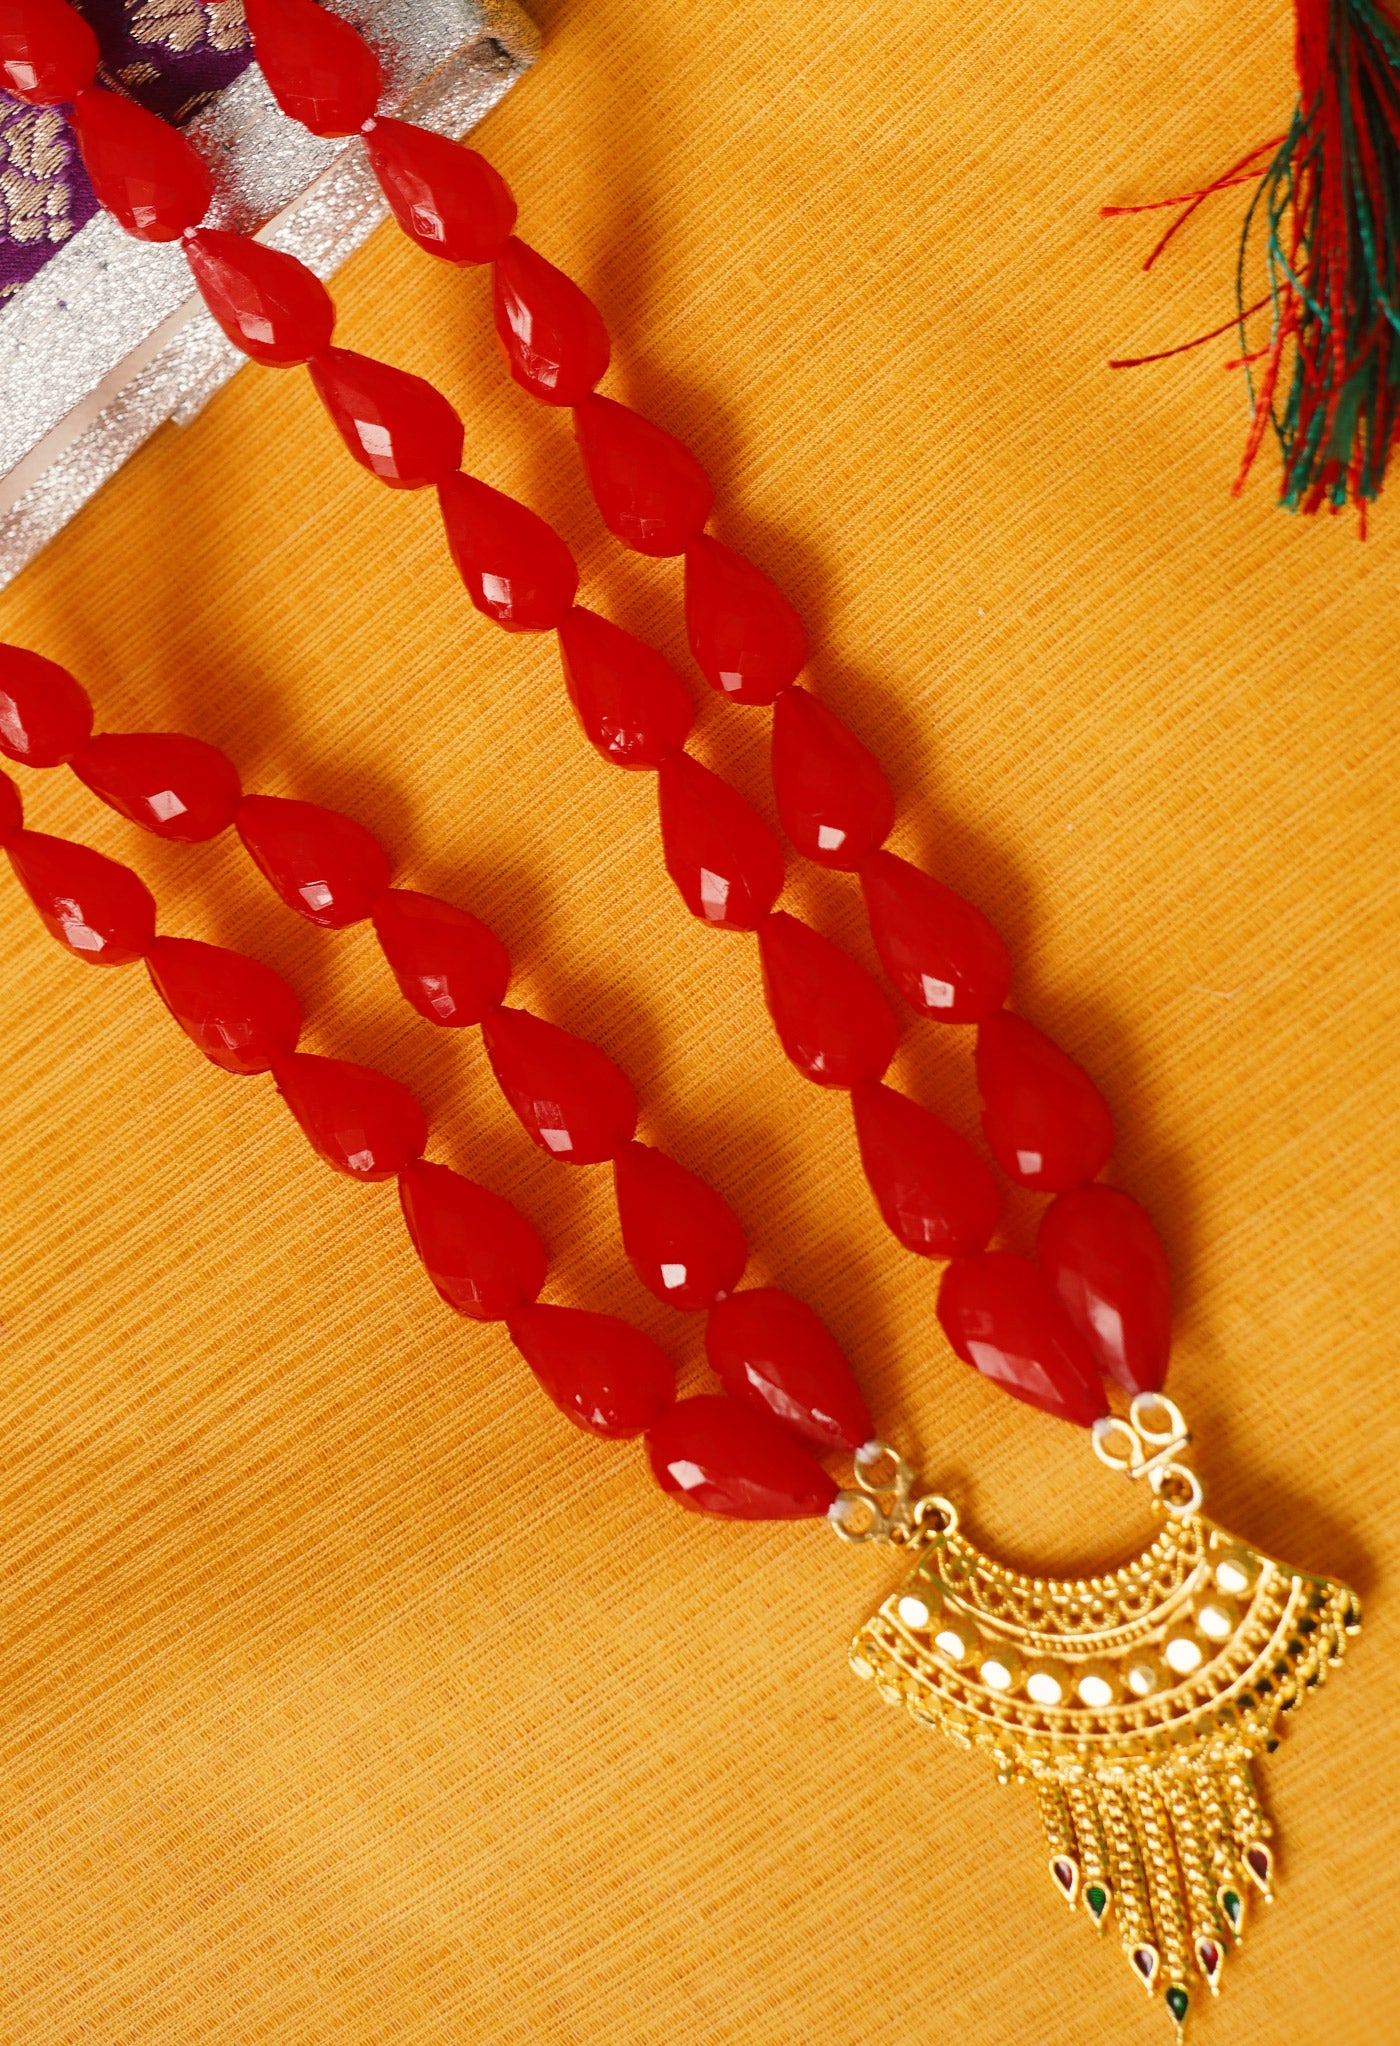 Red Amravati Long Oval Shape Beads with Pendent- UJ446